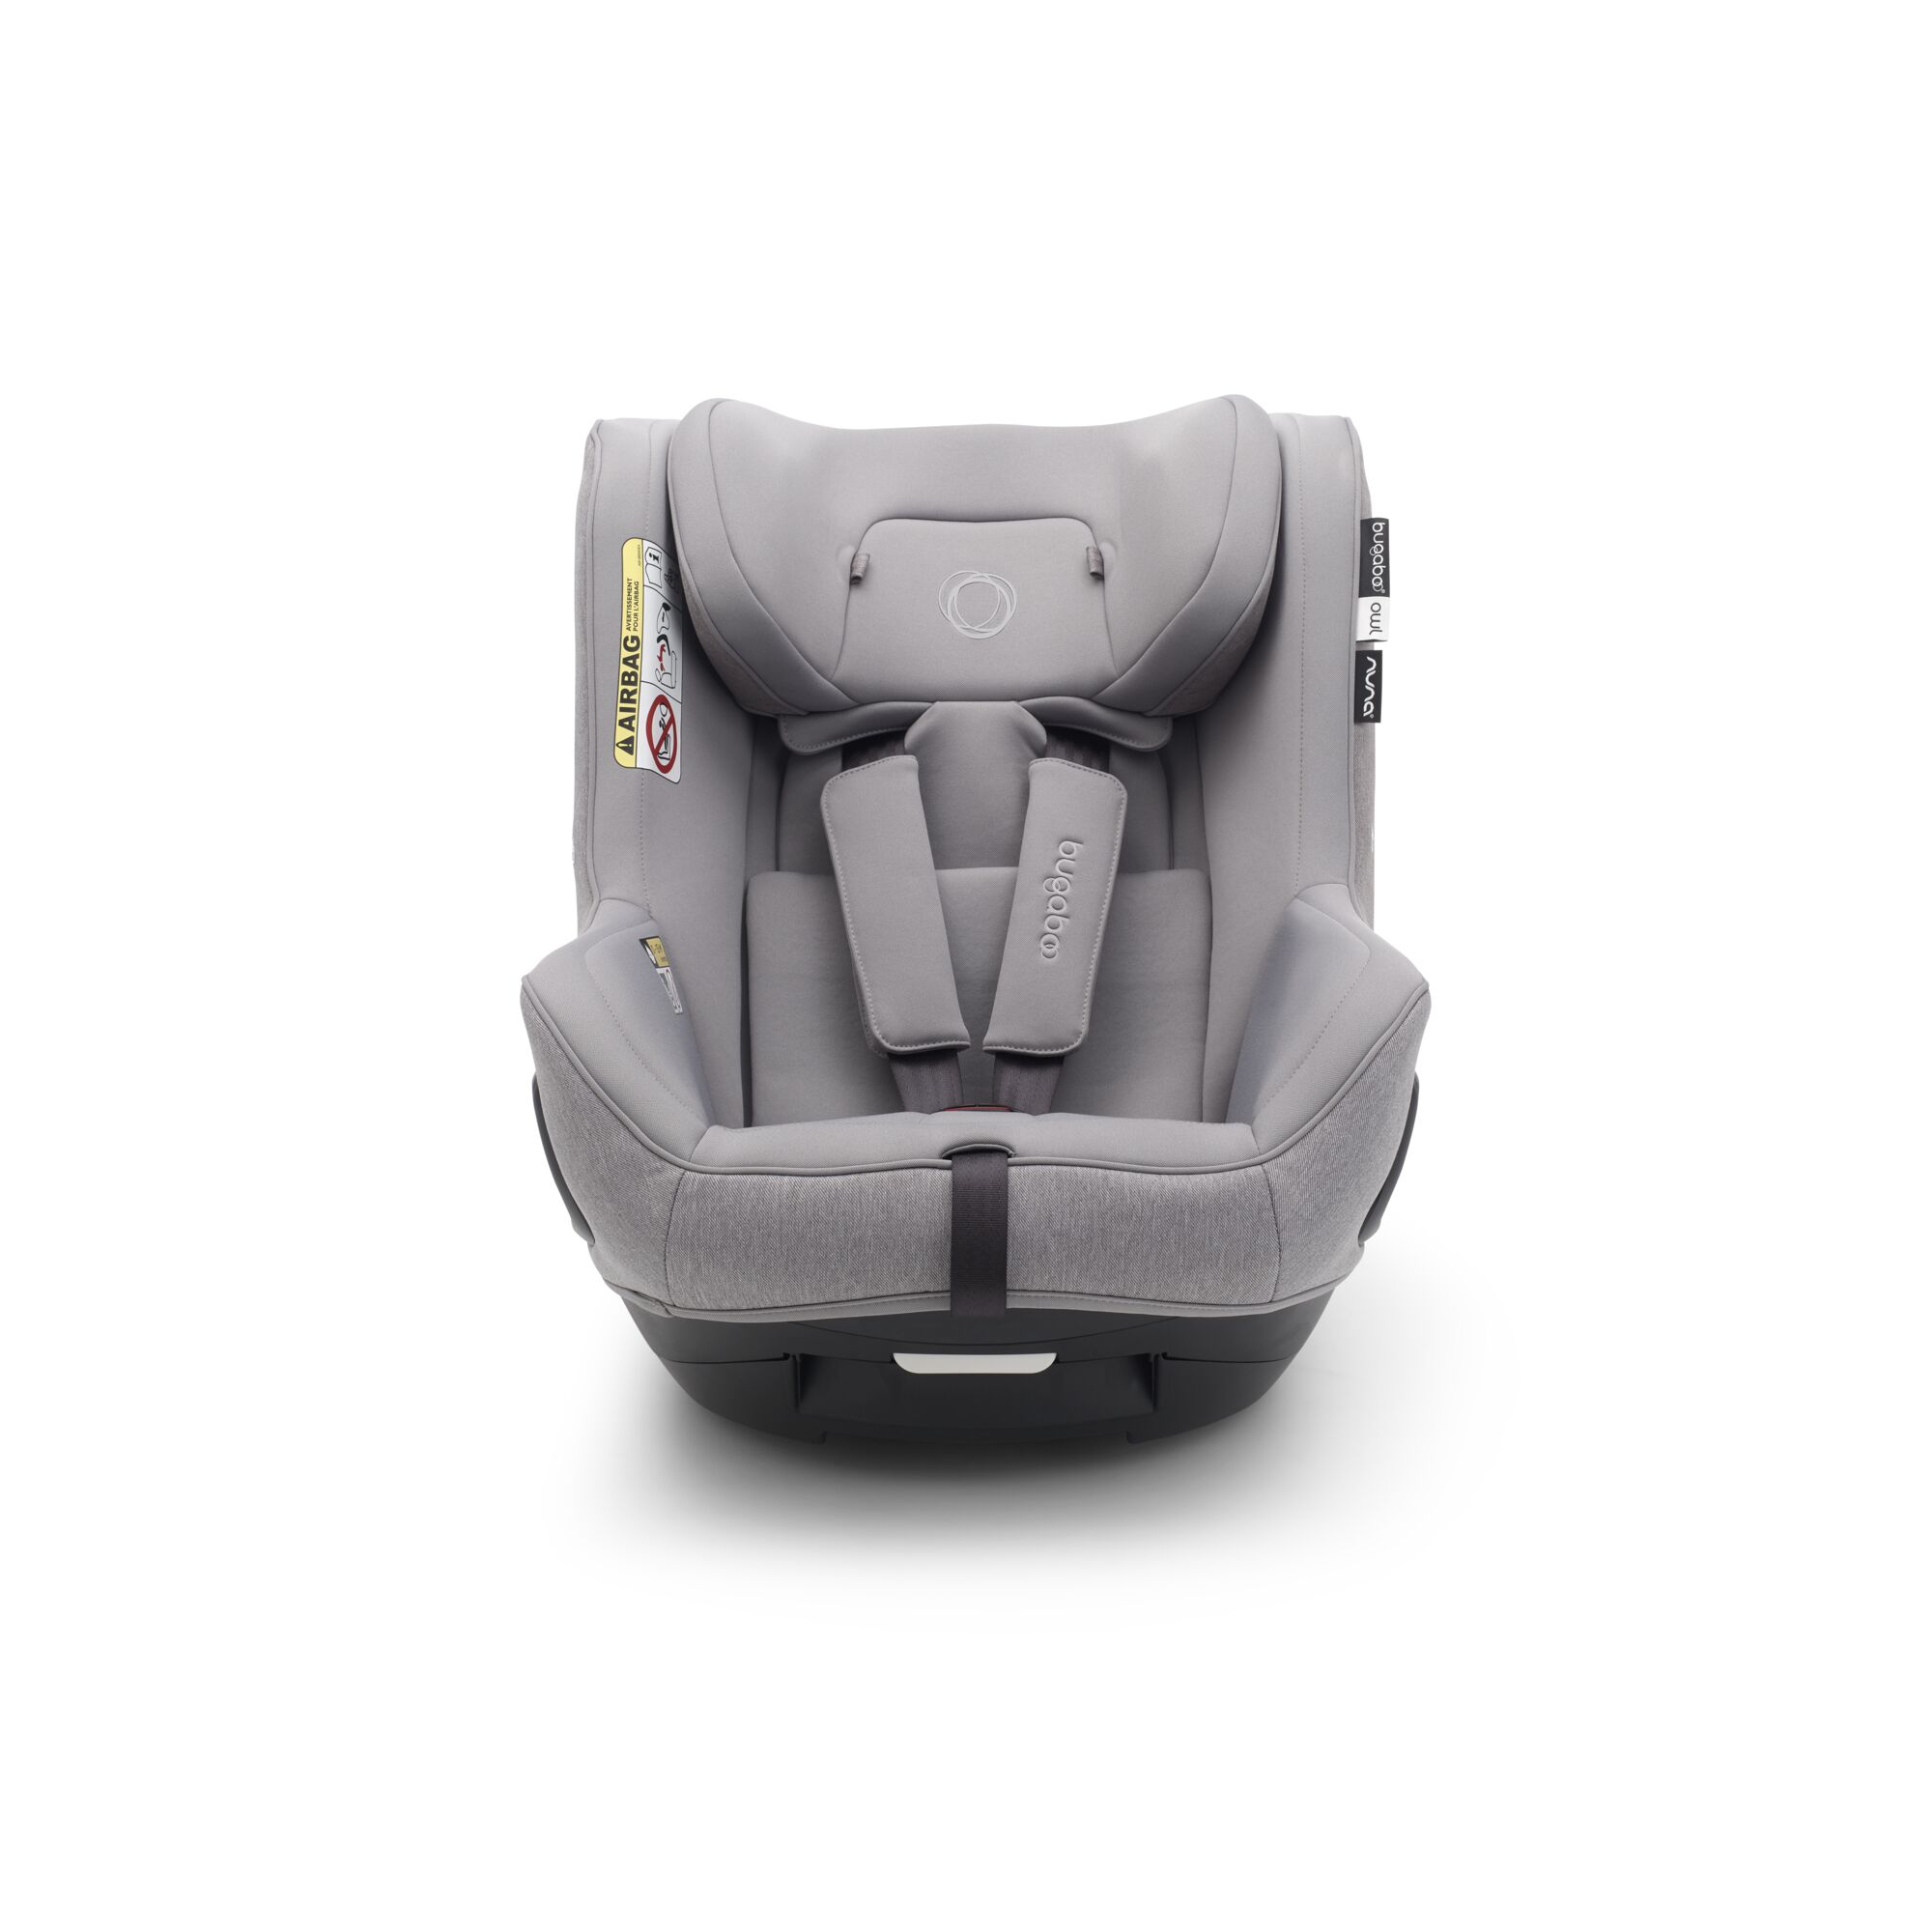 Uitgestorven Fauteuil aanval Order the Bugaboo Owl By Nuna Car Seat online - Baby Plus